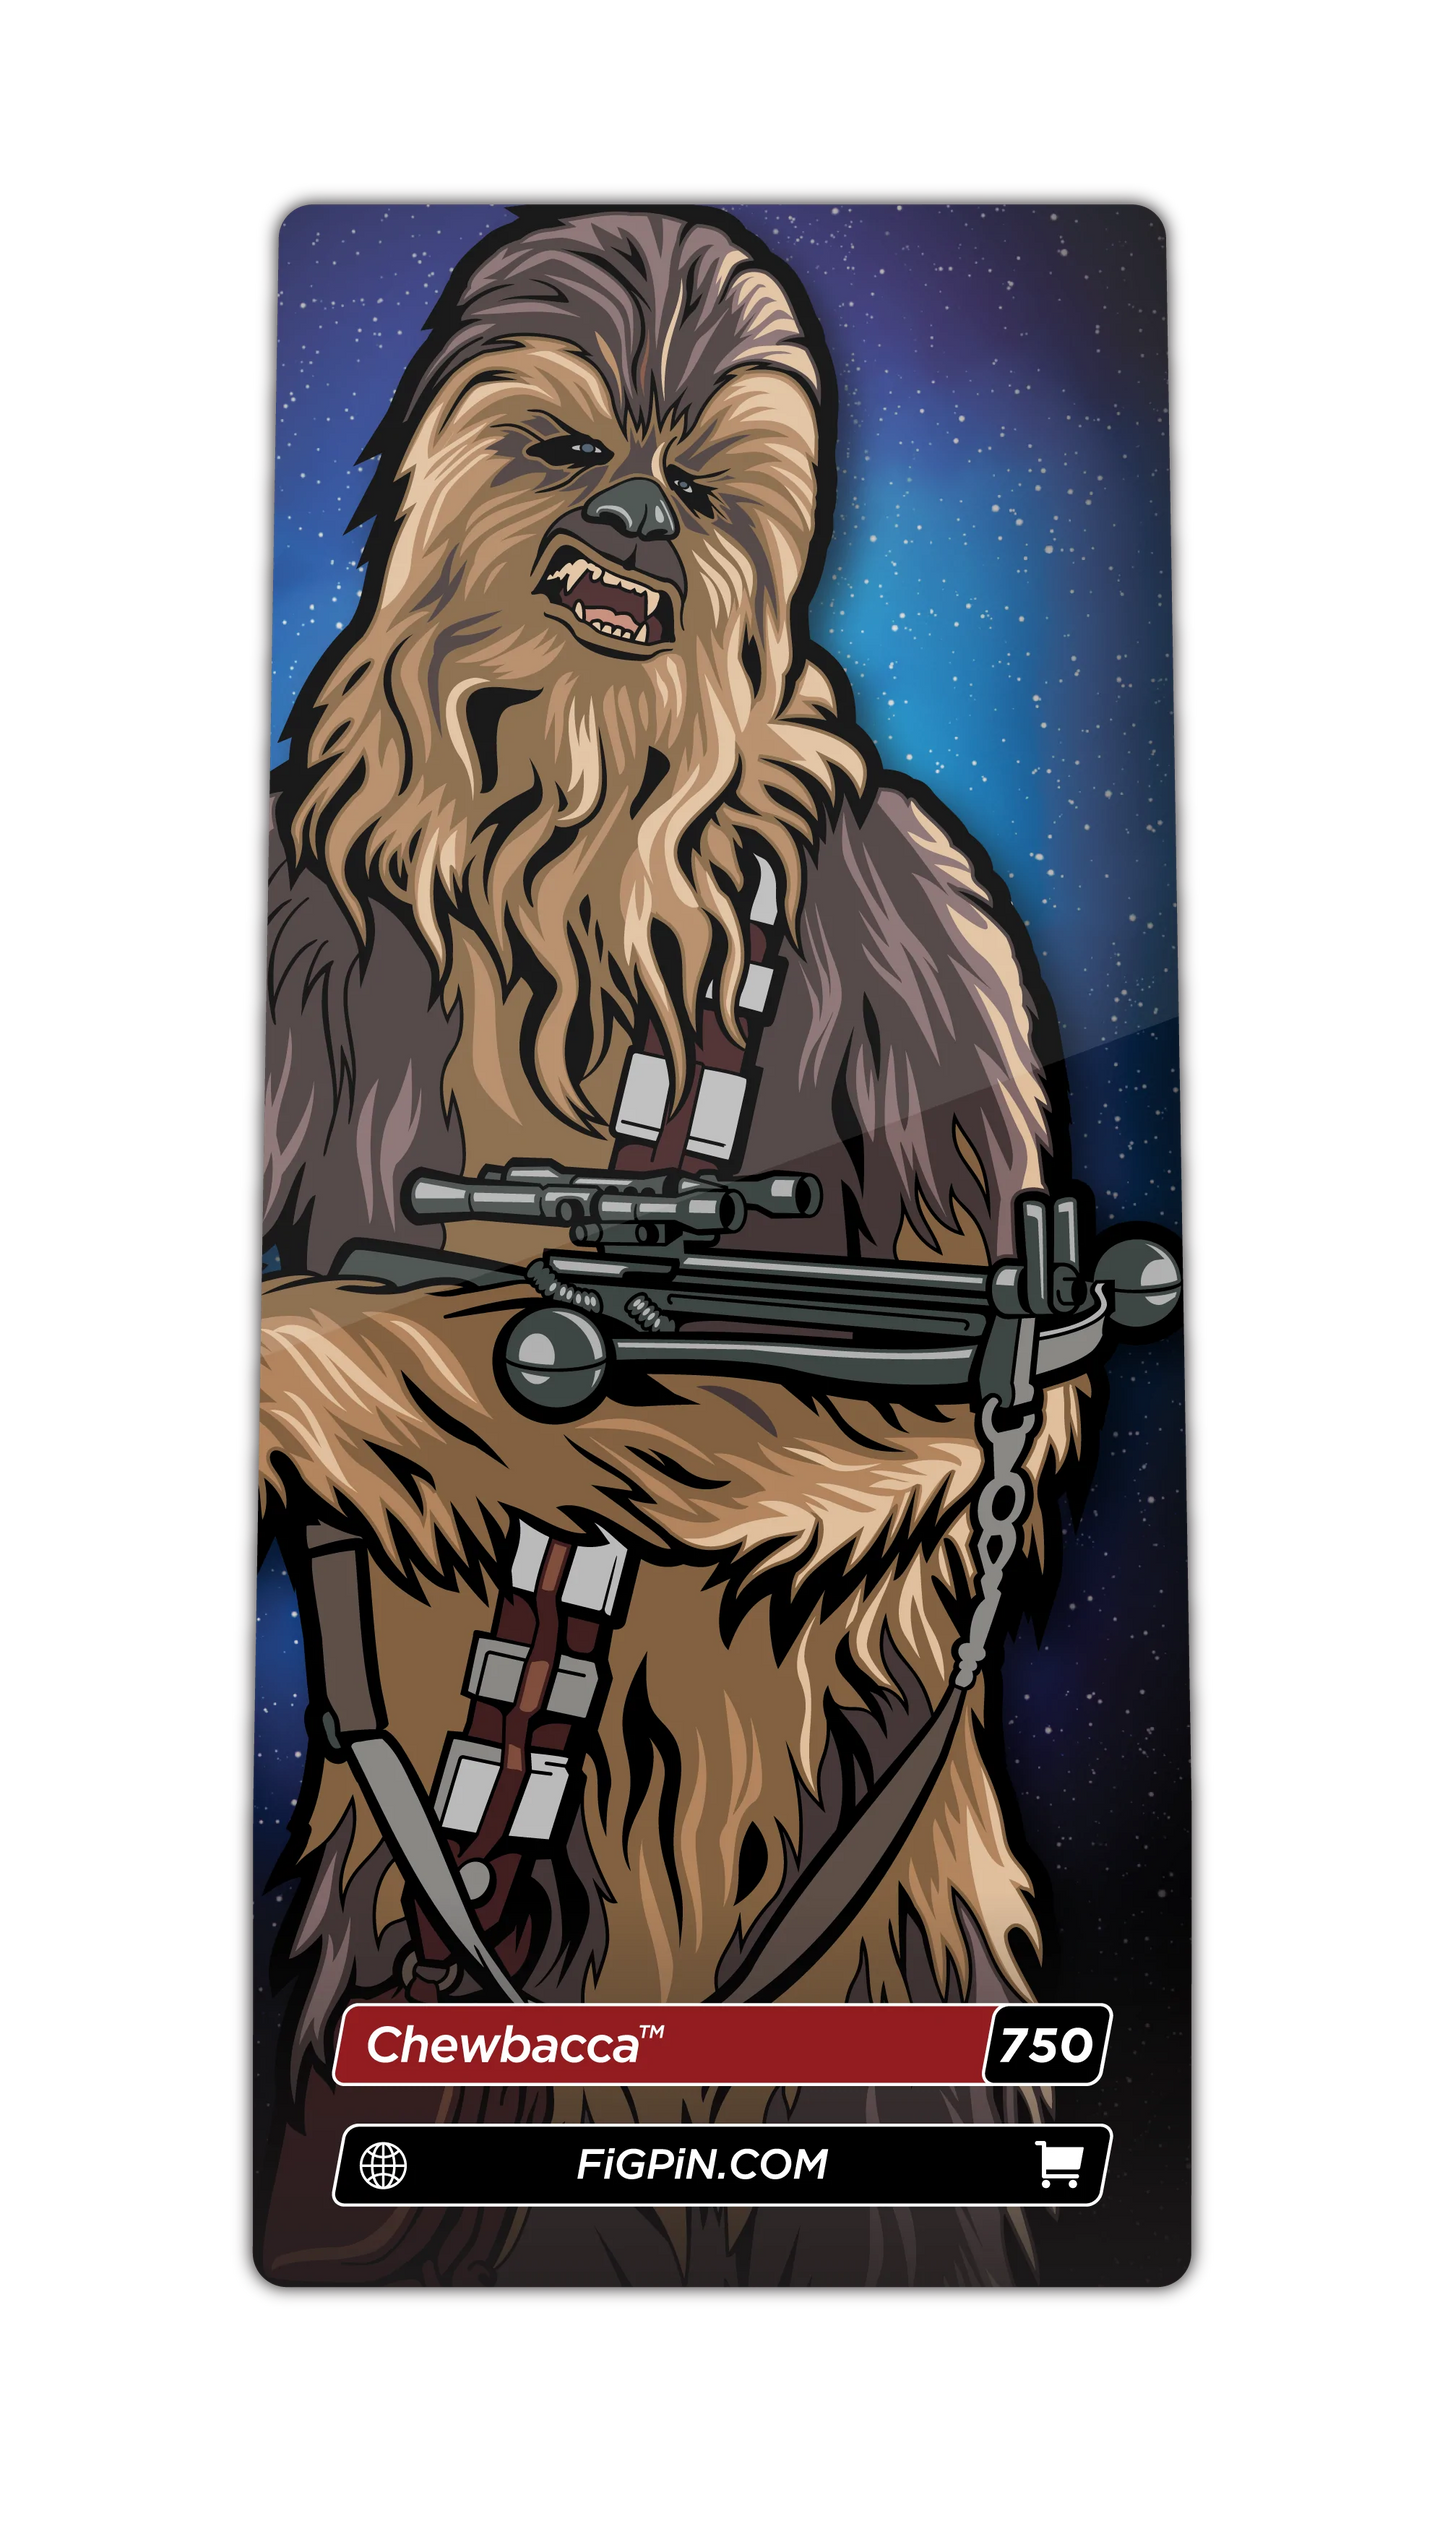 FiGPiN Chewbacca (750) Property: Star Wars A New Hope